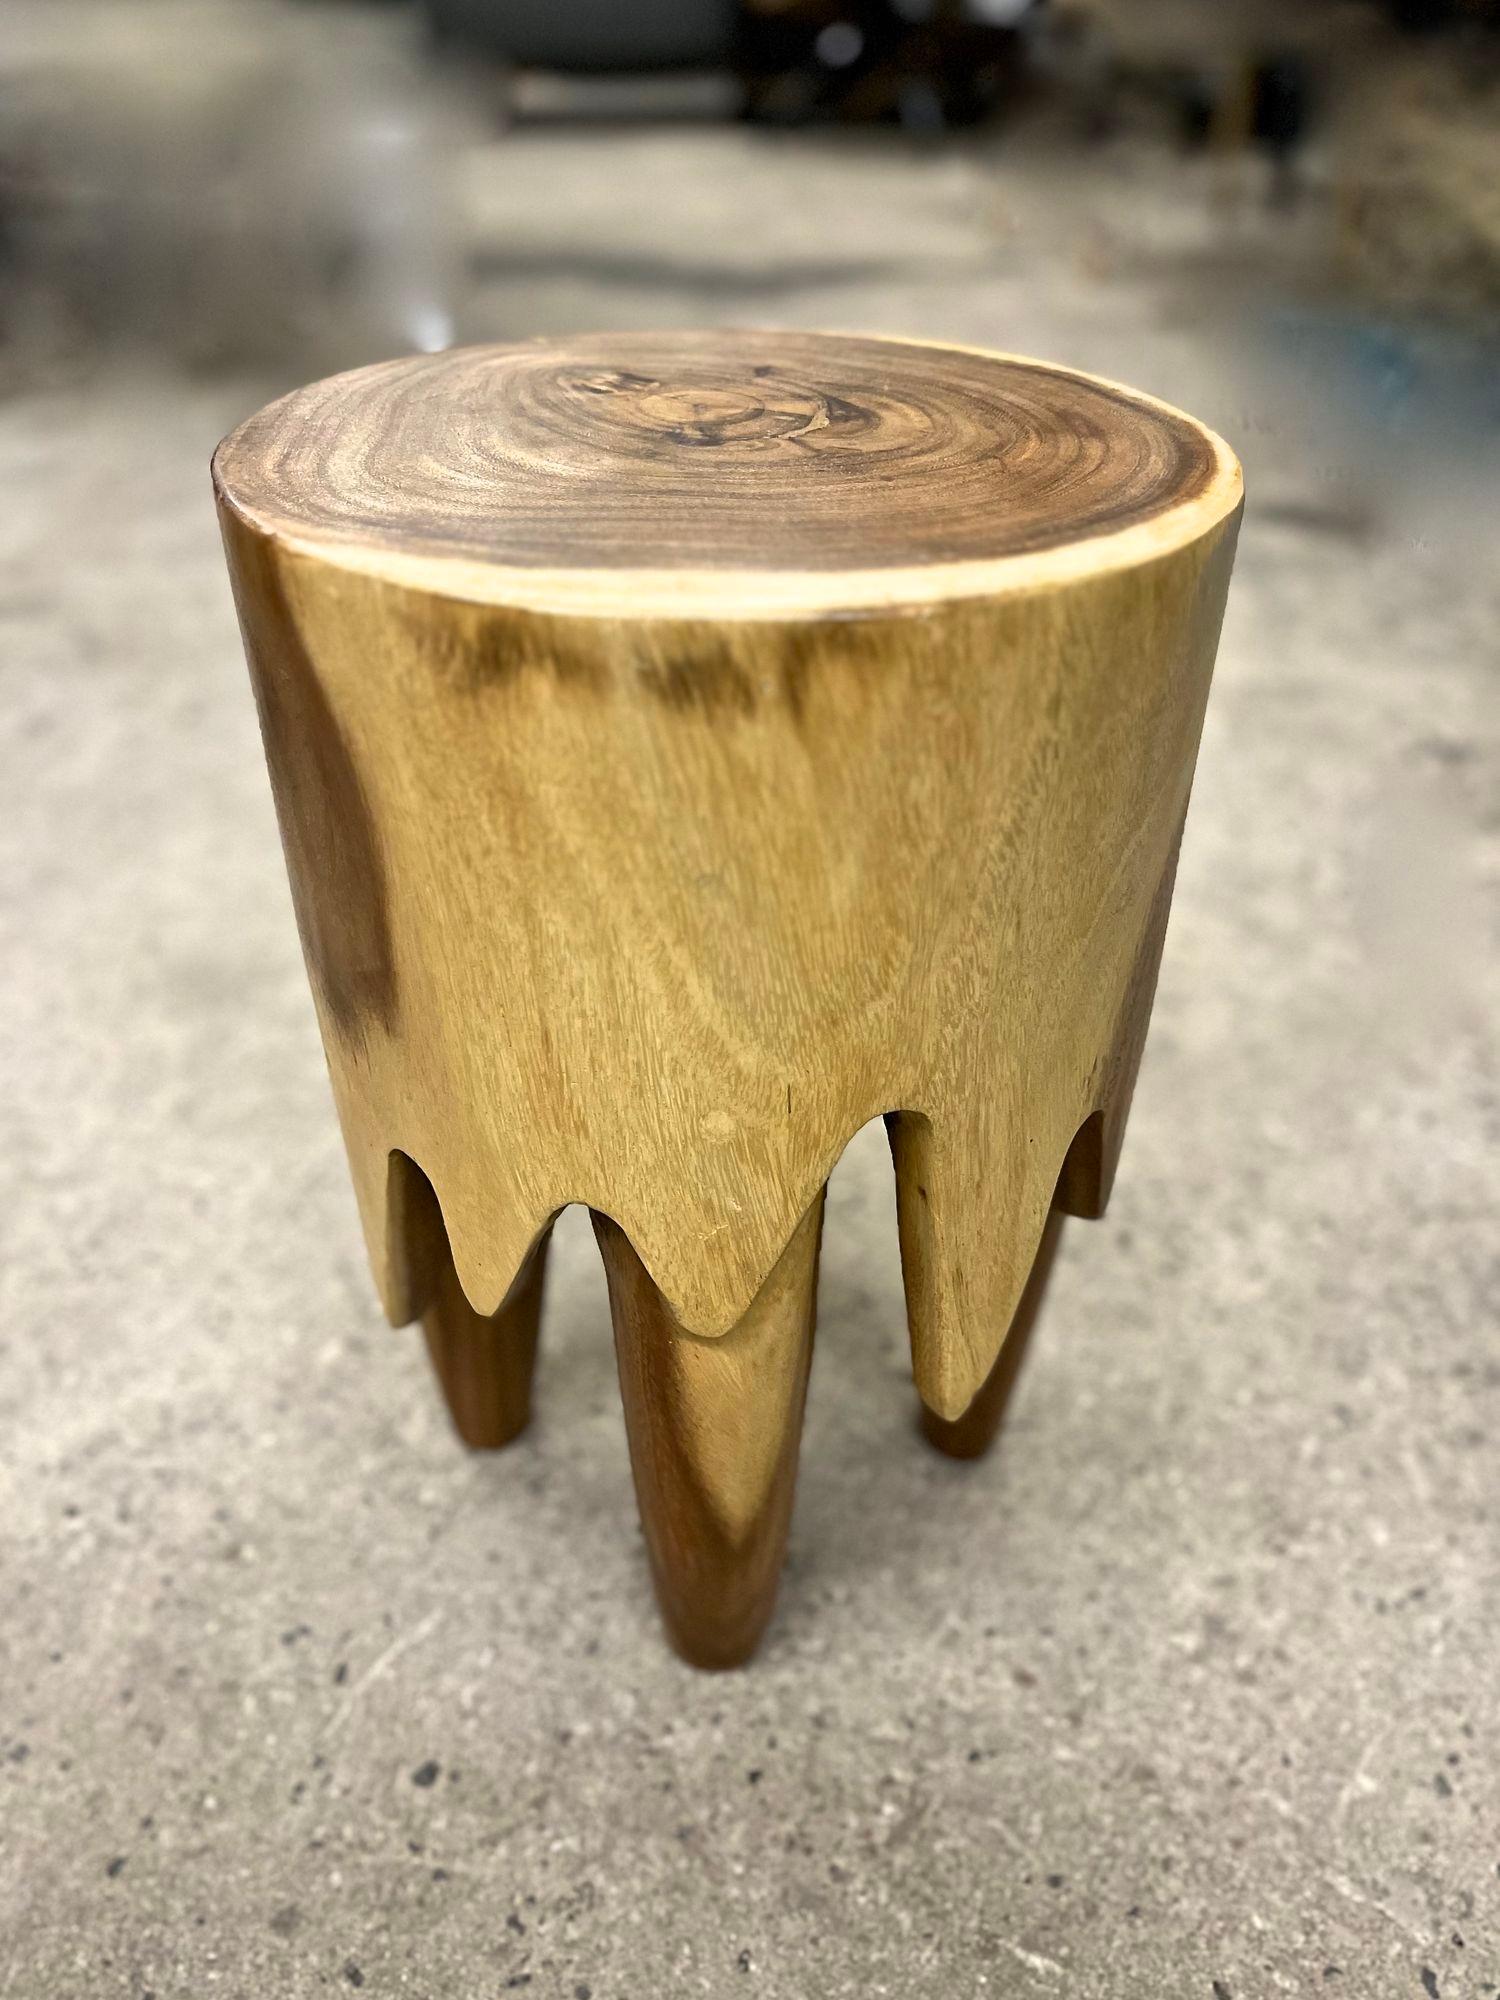 Extraordinary modern organic wooden side table or stool, artfully handcrafted out of Suar wood by a javanese artist. This unique side table/ stool has been carved out of one piece and impresses with its special design making it look like the wood is